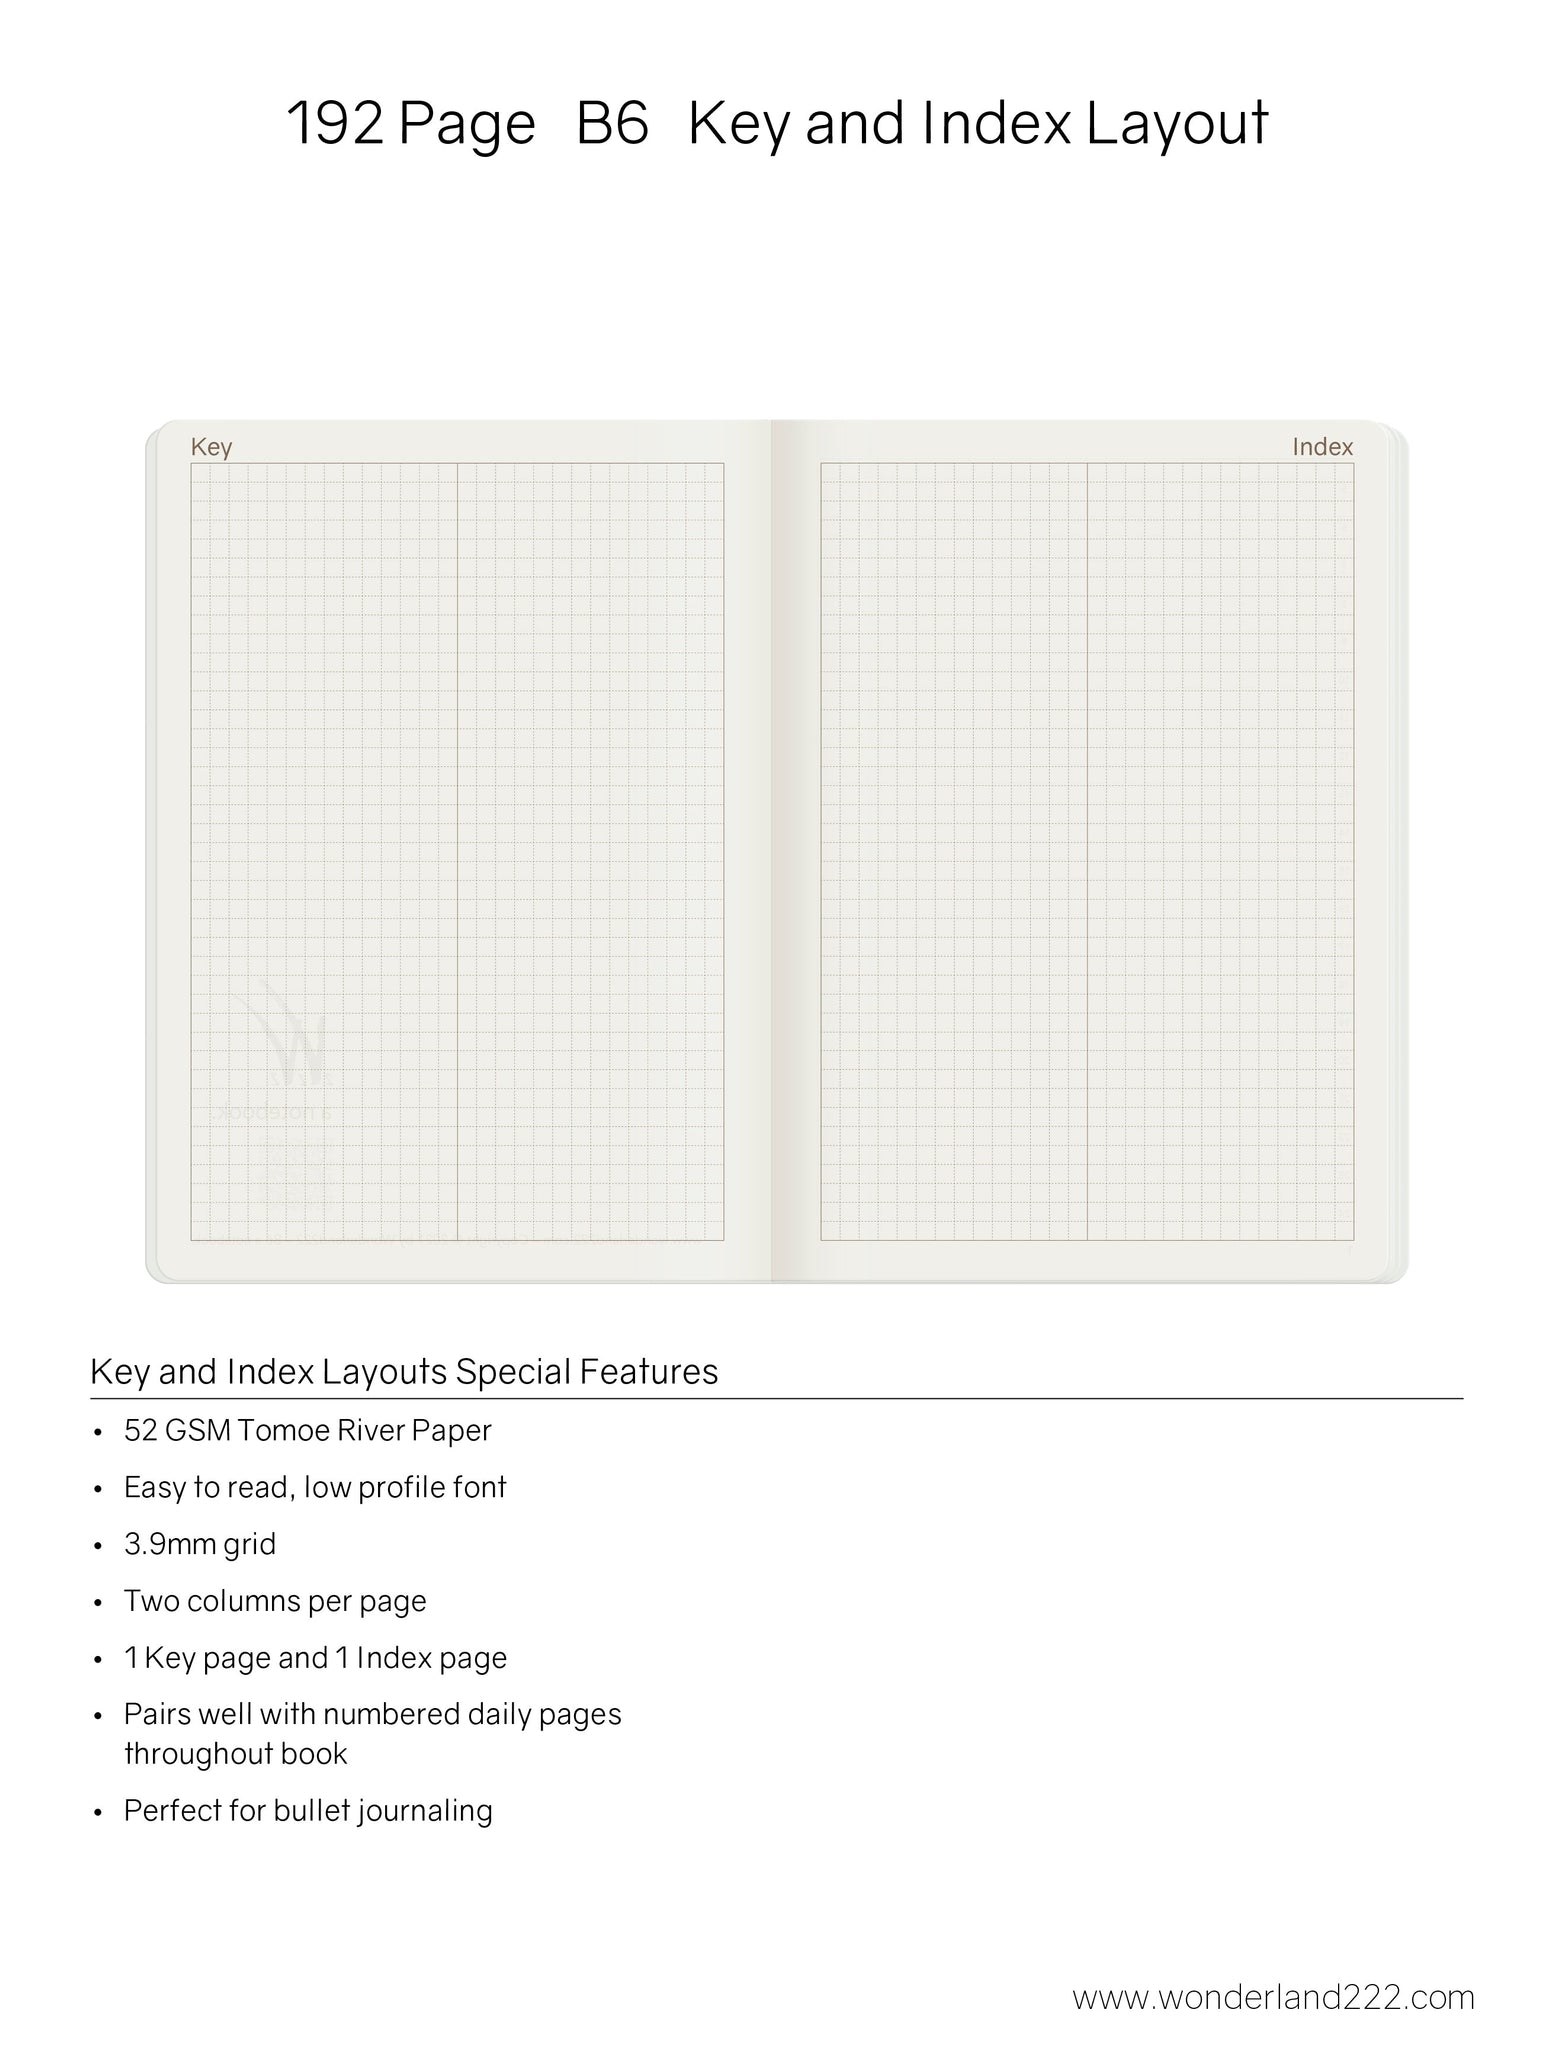 IMPERFECT | B6 Notebook (192 pages) - 2022 Edition